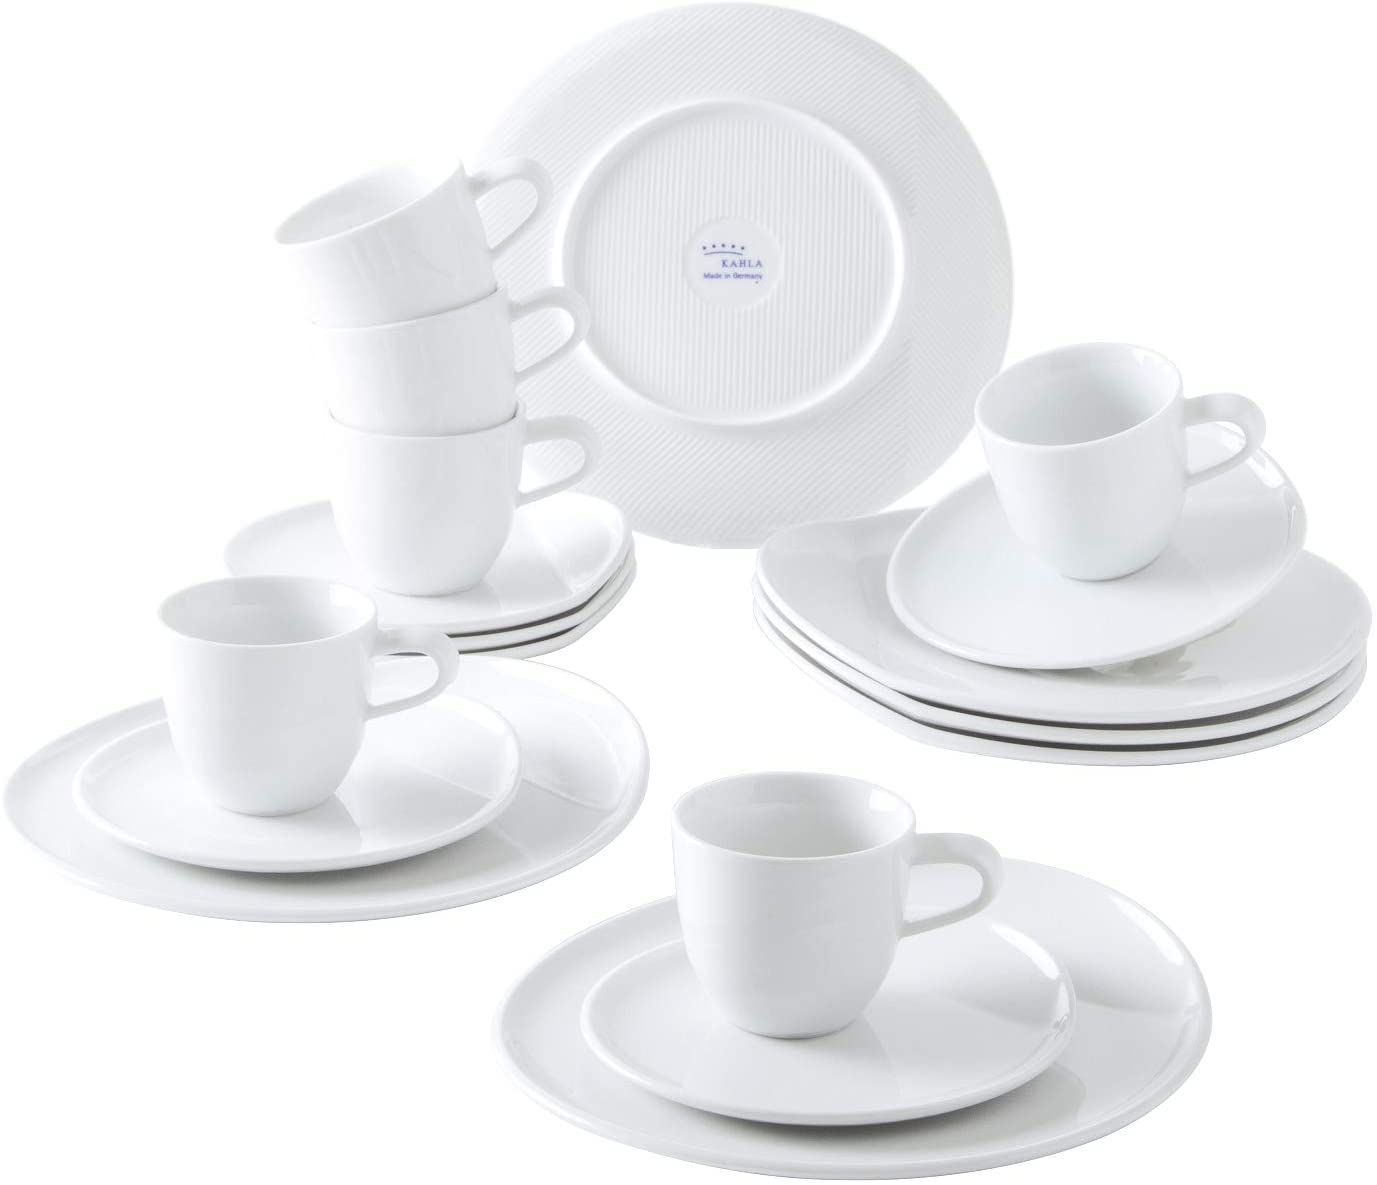 Kahla O - The Better Place 020427A90002C Modern Porcelain Cups Set for 6 People Coffee Service Cups Saucers Plates 18 Pieces White